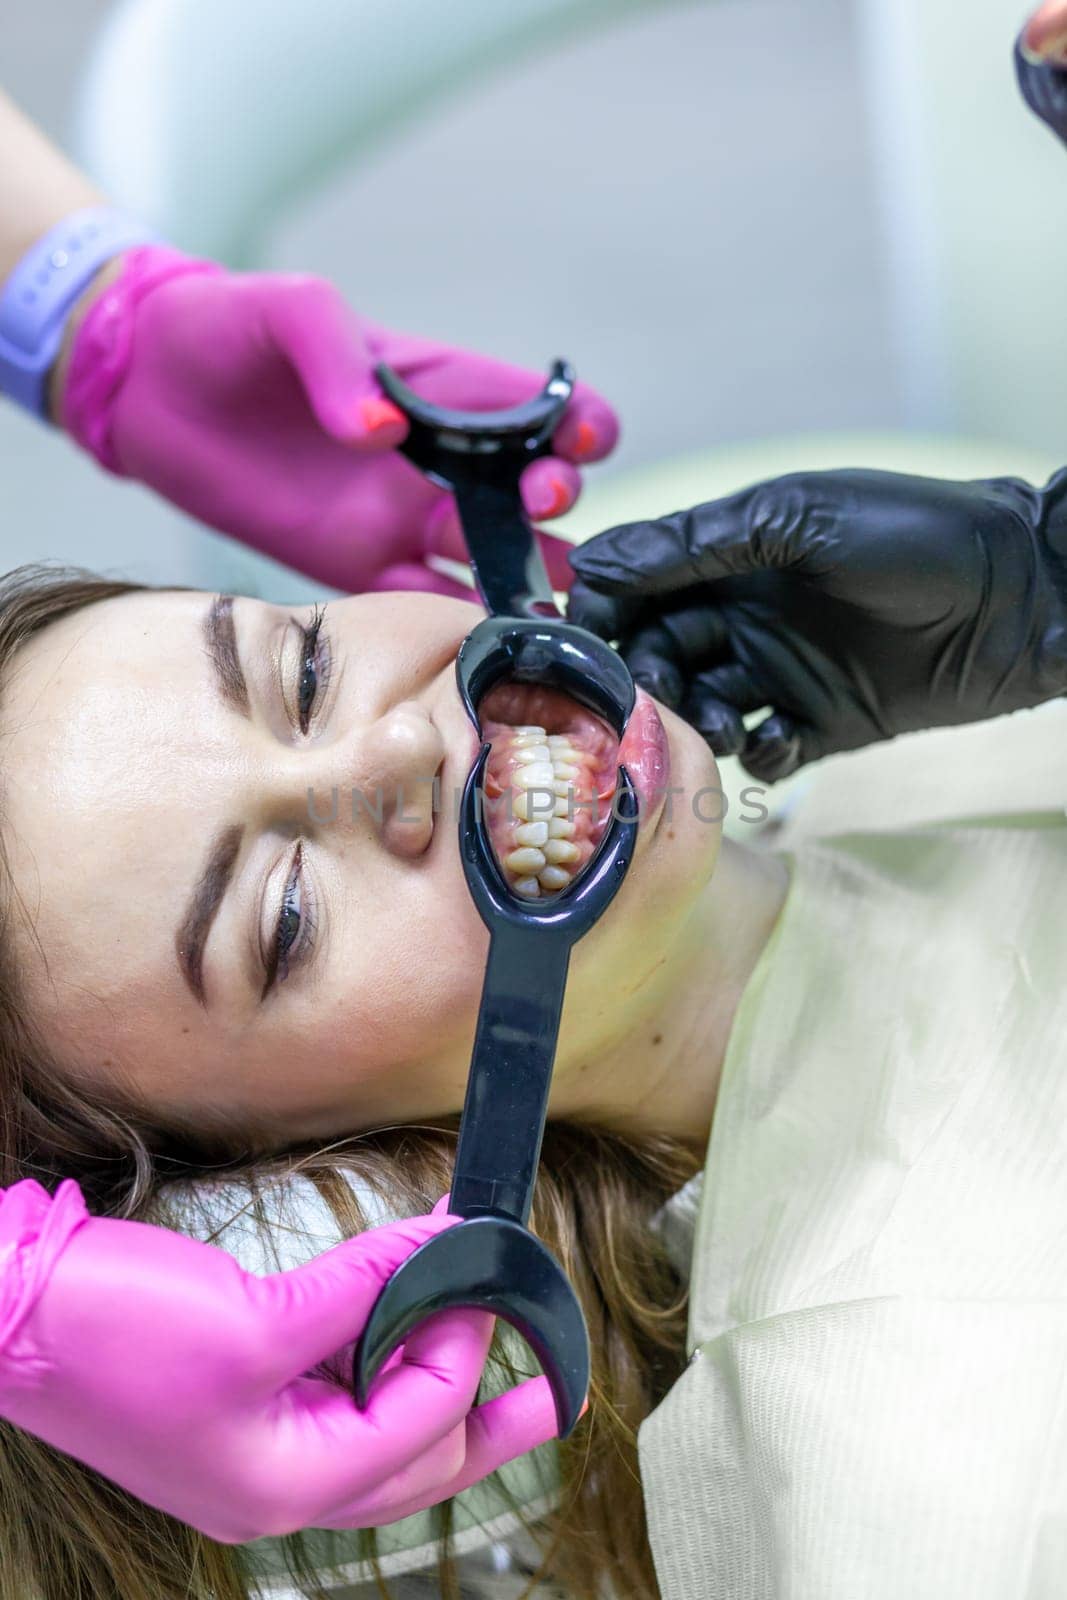 Beautiful woman with a mouth expander in a dental chair during by AnatoliiFoto